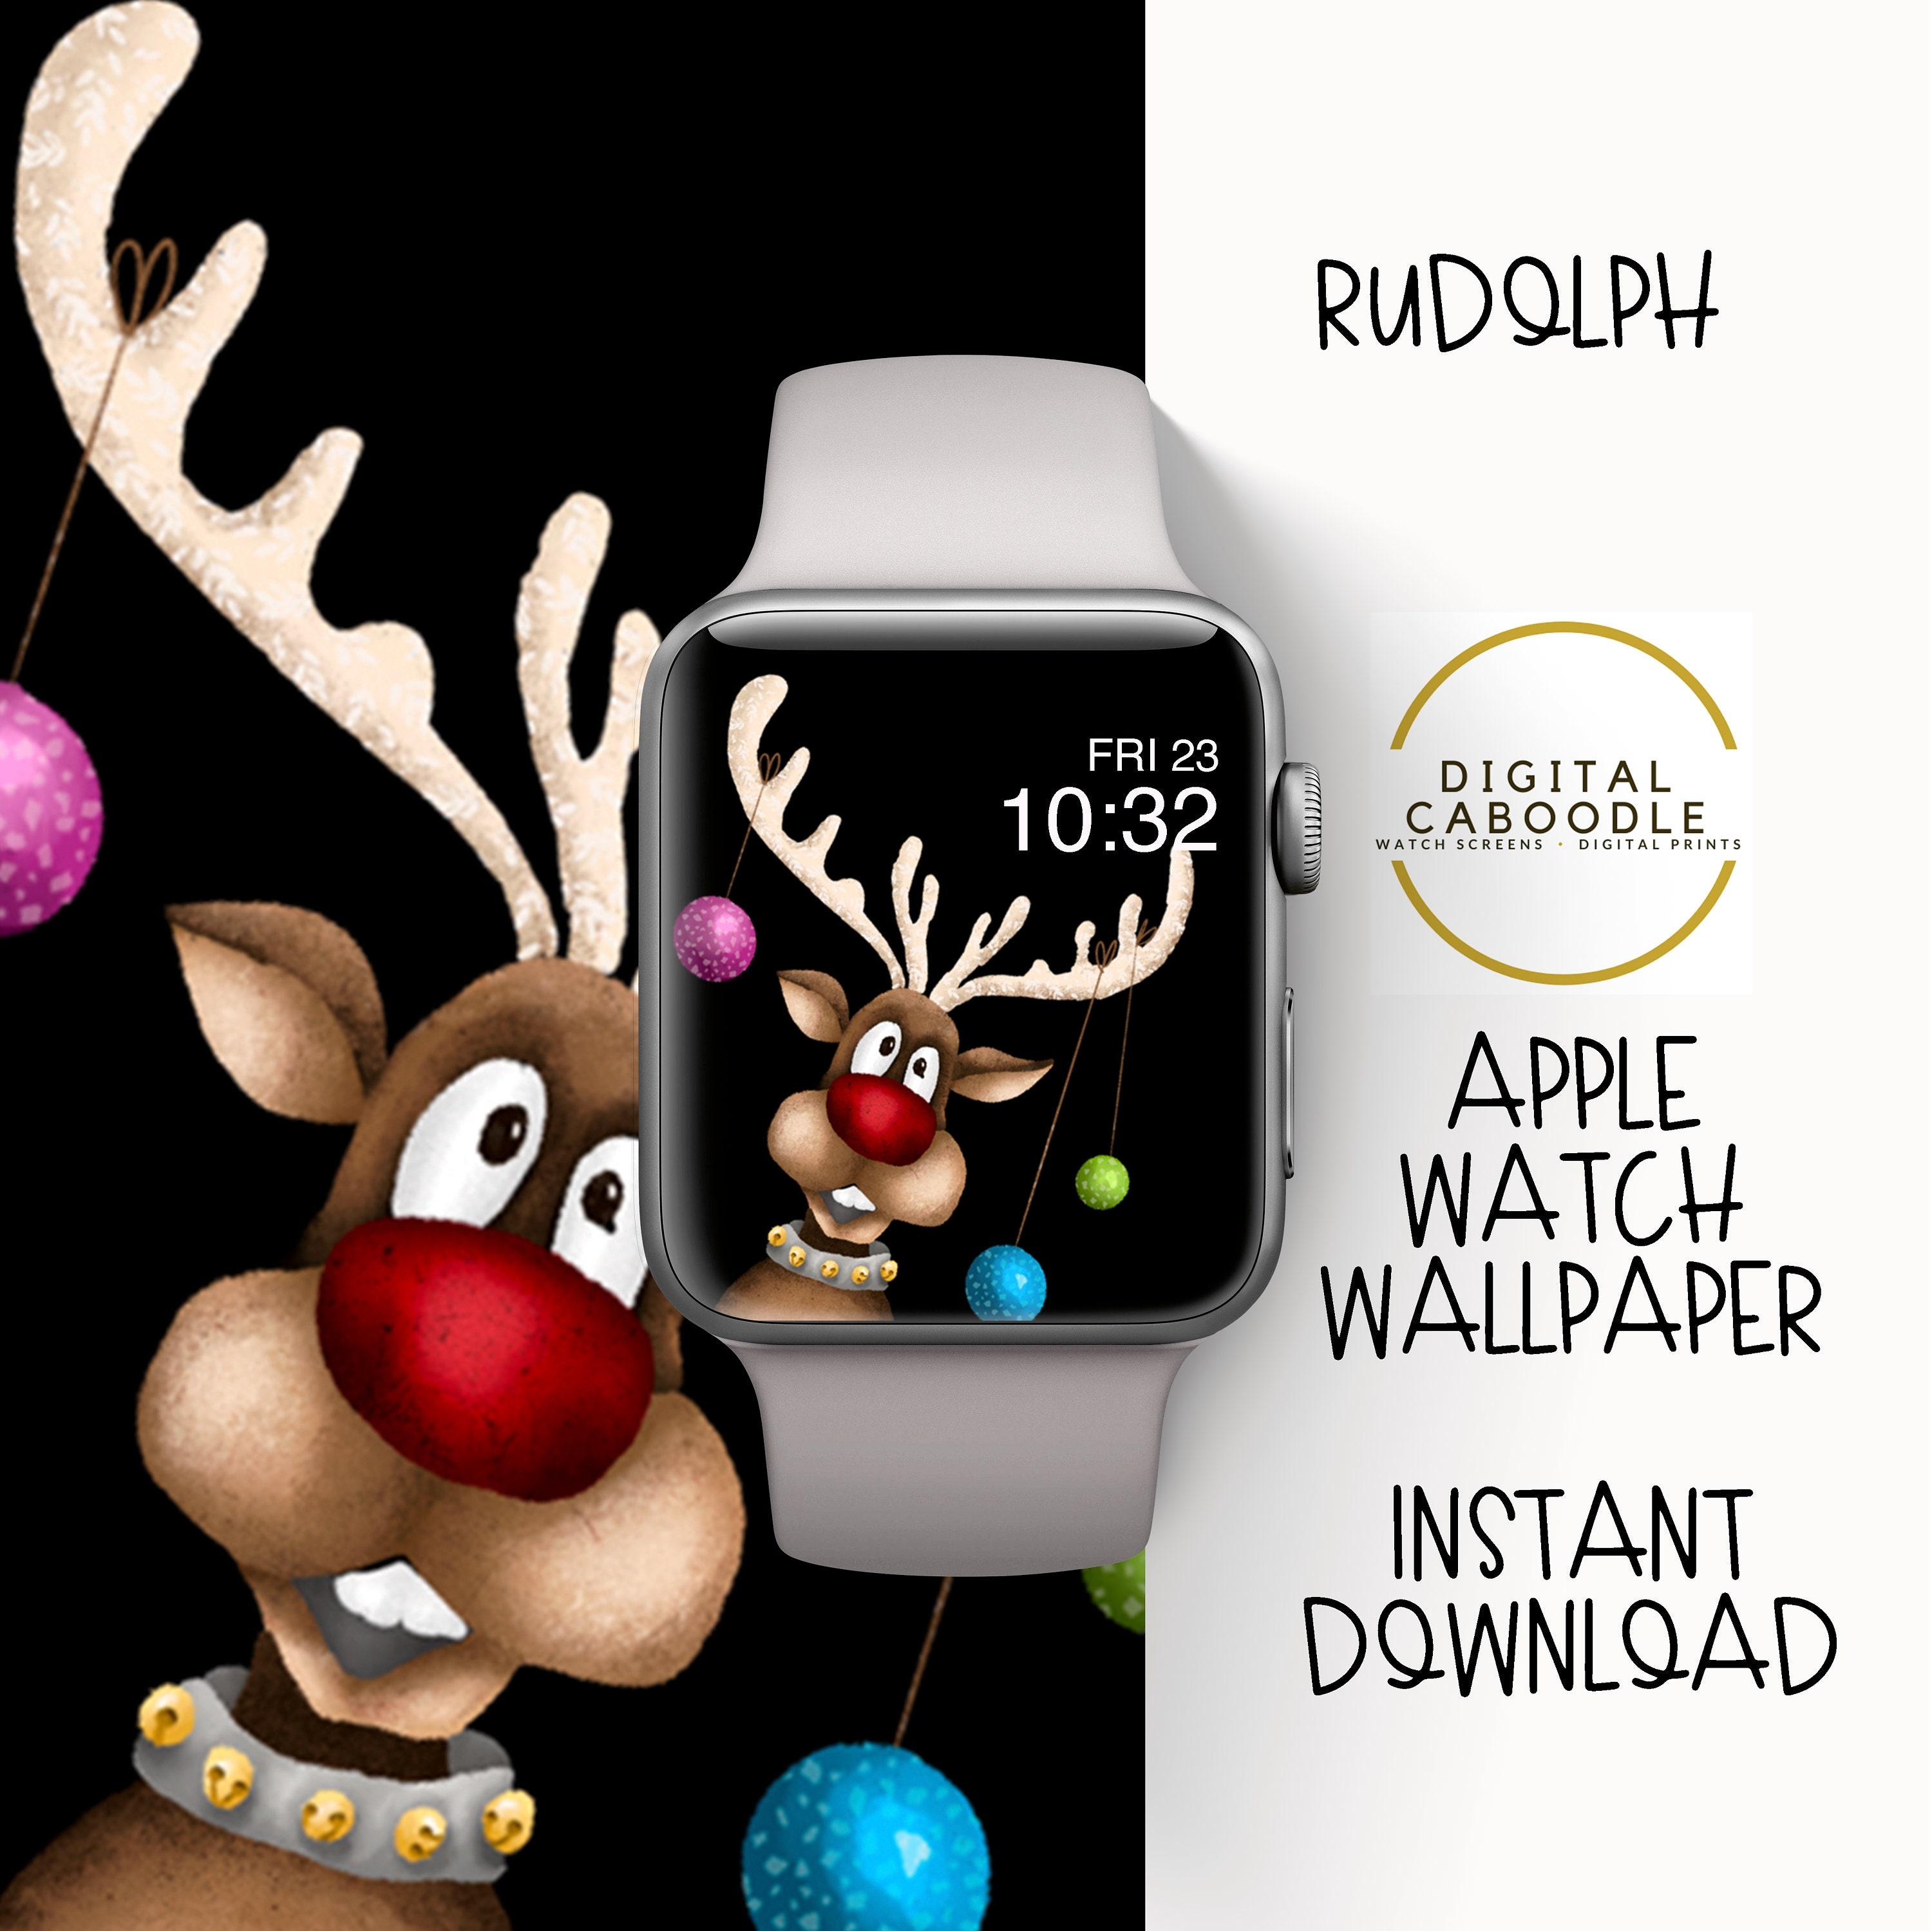 Christmas Wallpaper Smart Watch Funny Rudolph And Baubles